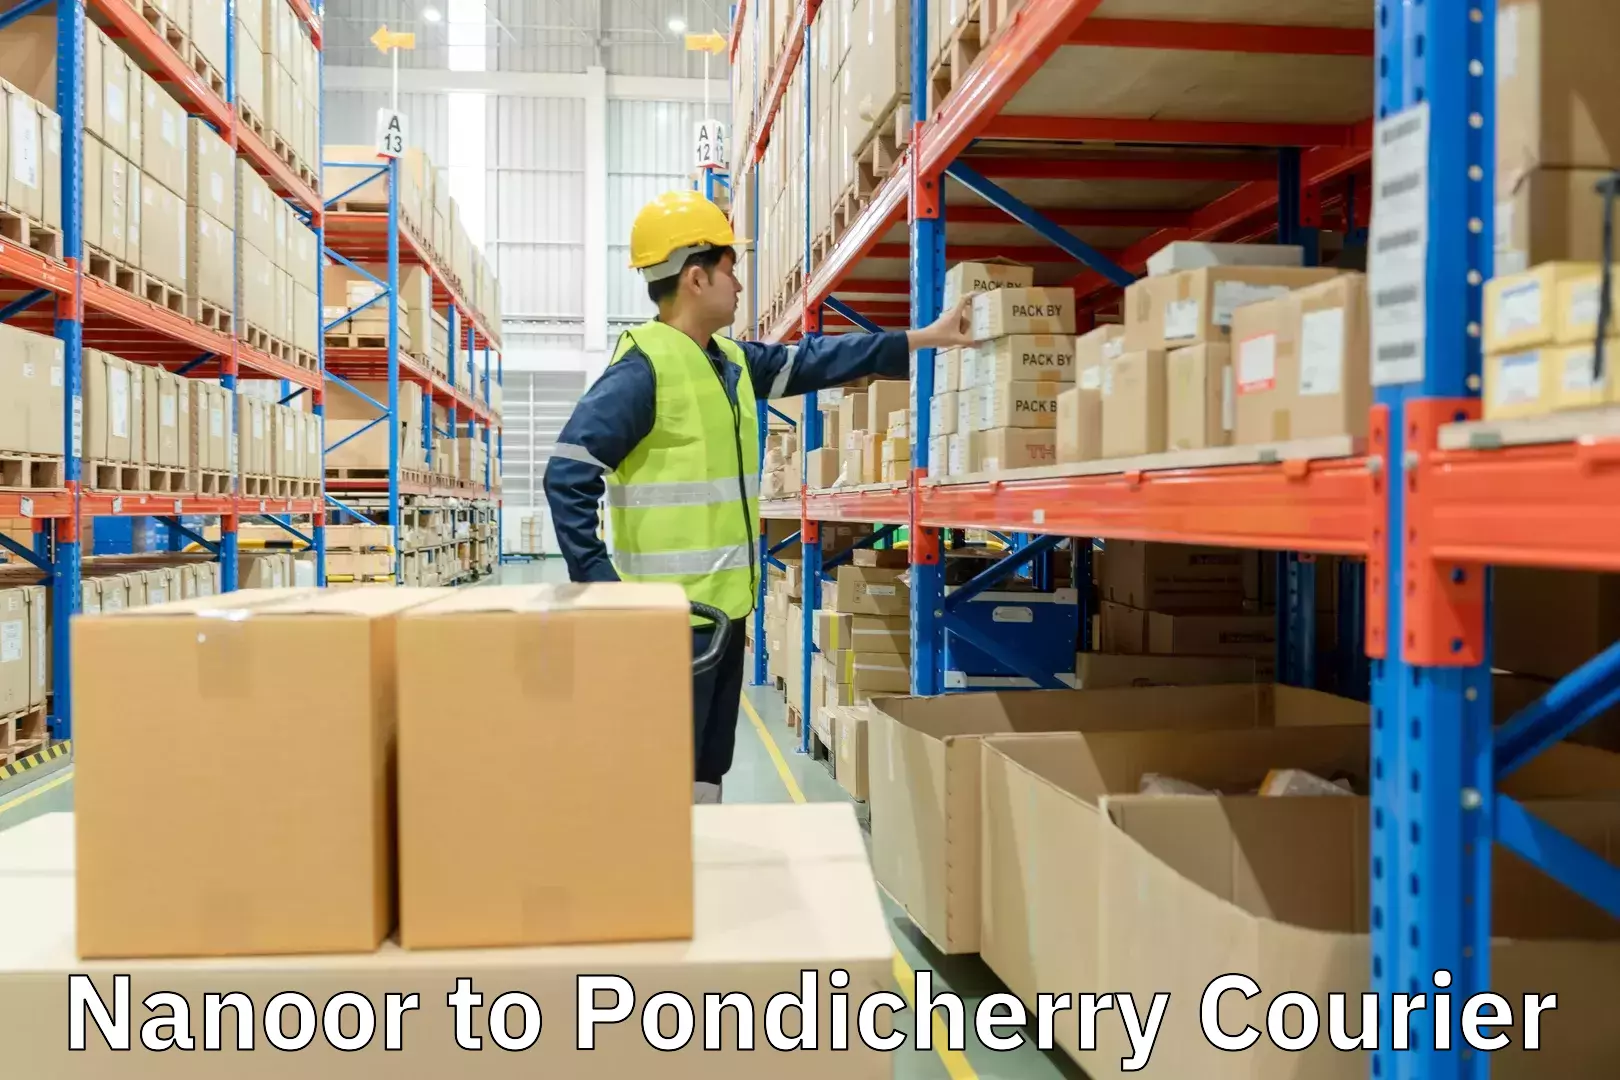 Package delivery network Nanoor to Pondicherry University